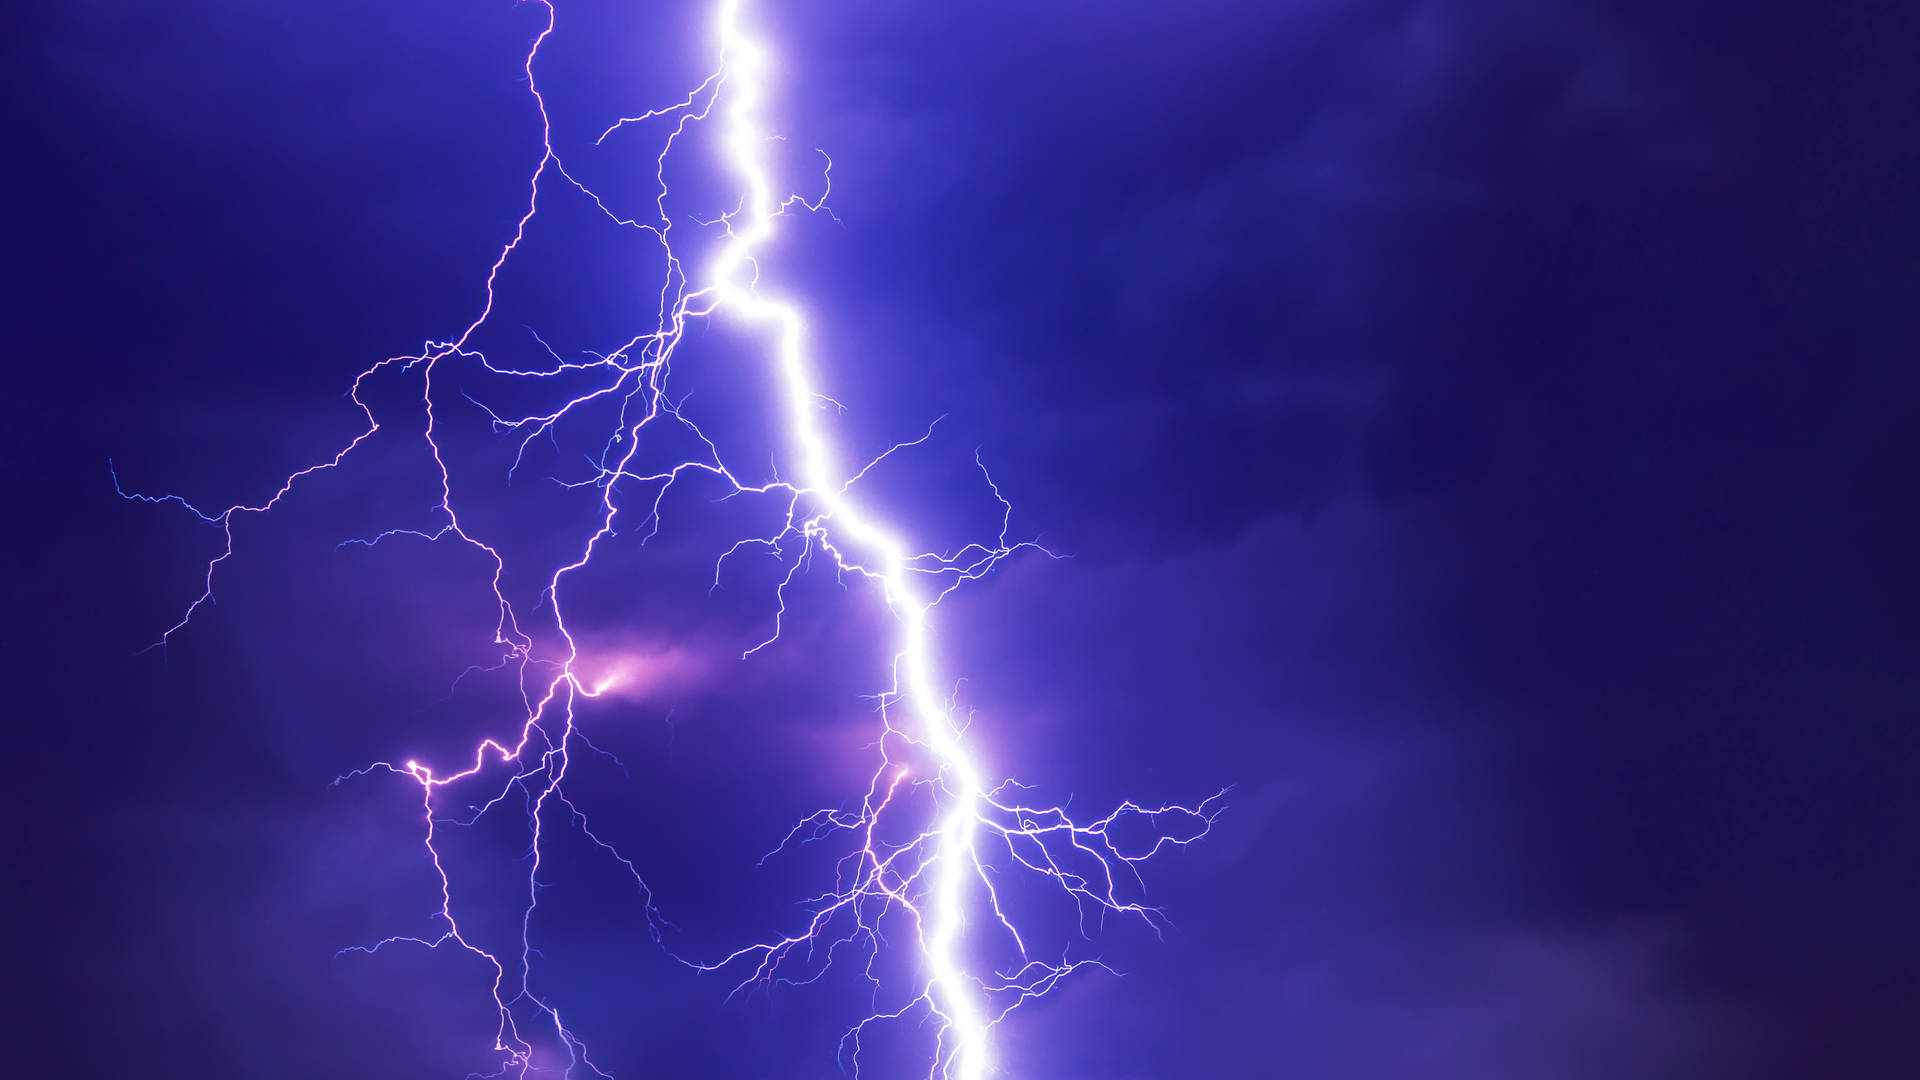 5885X3310 Lightning Wallpaper and Background